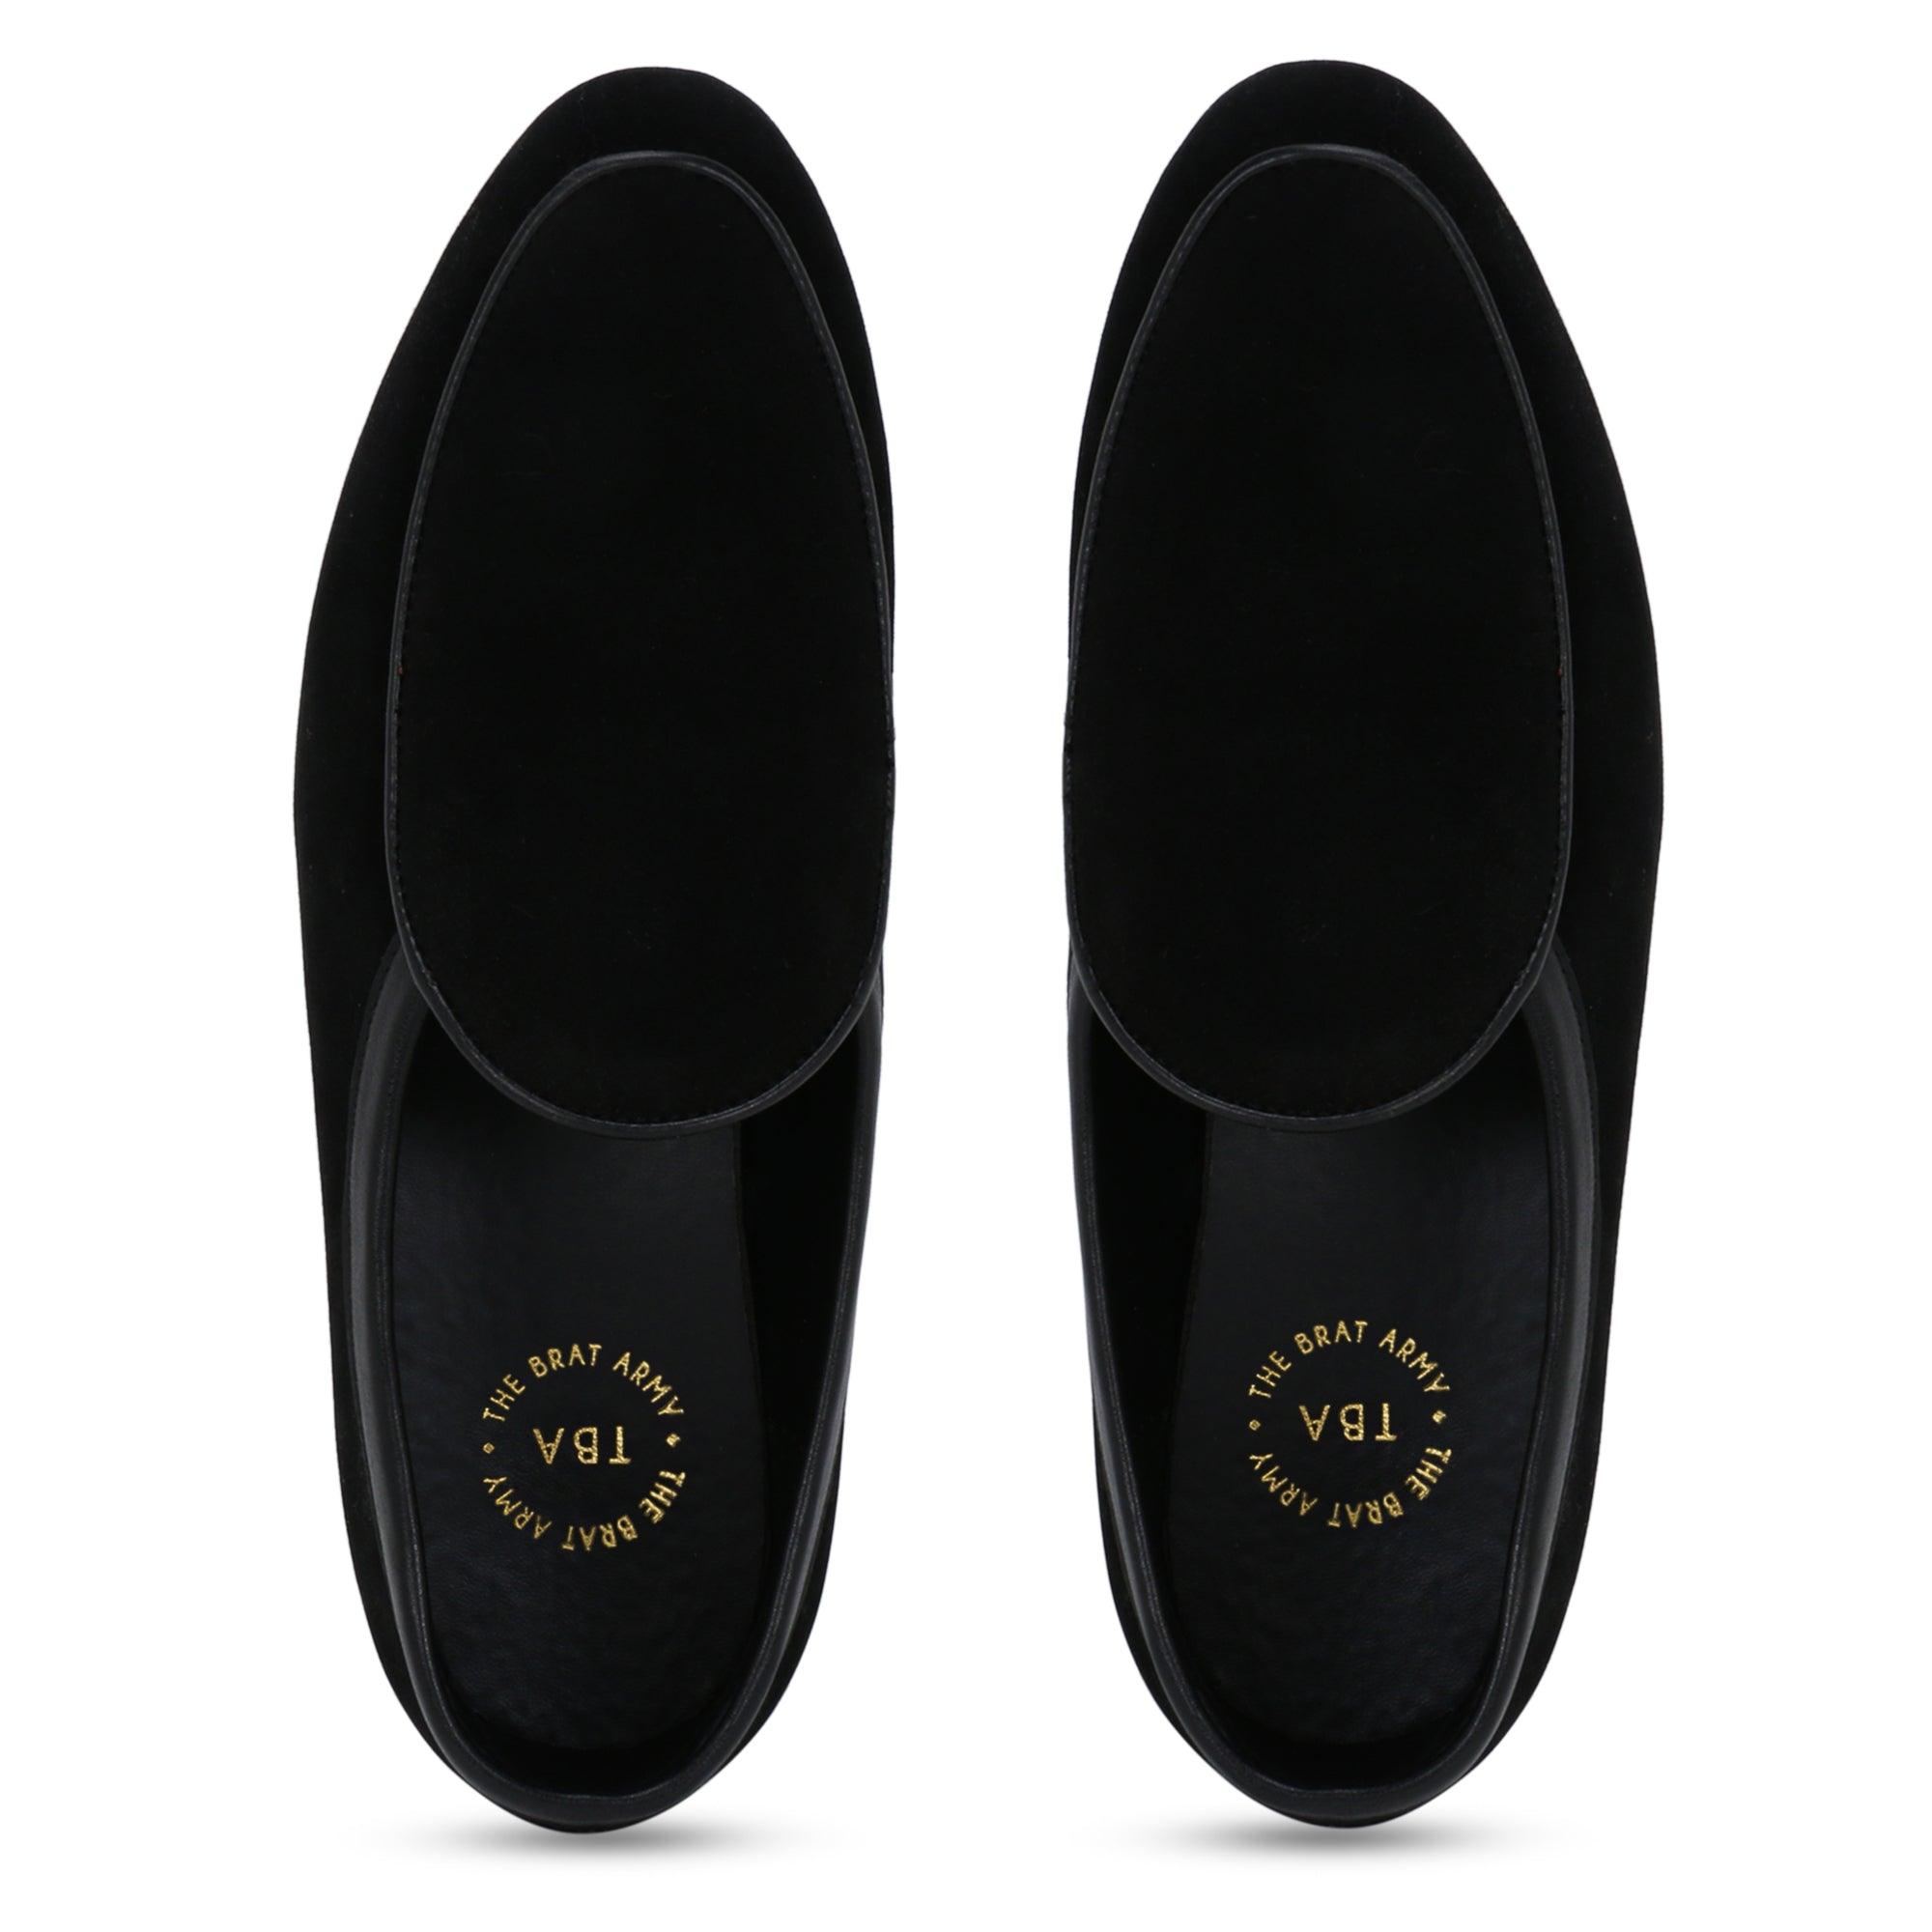 BOSTON BLACK SUEDE CLASSIC LOAFER